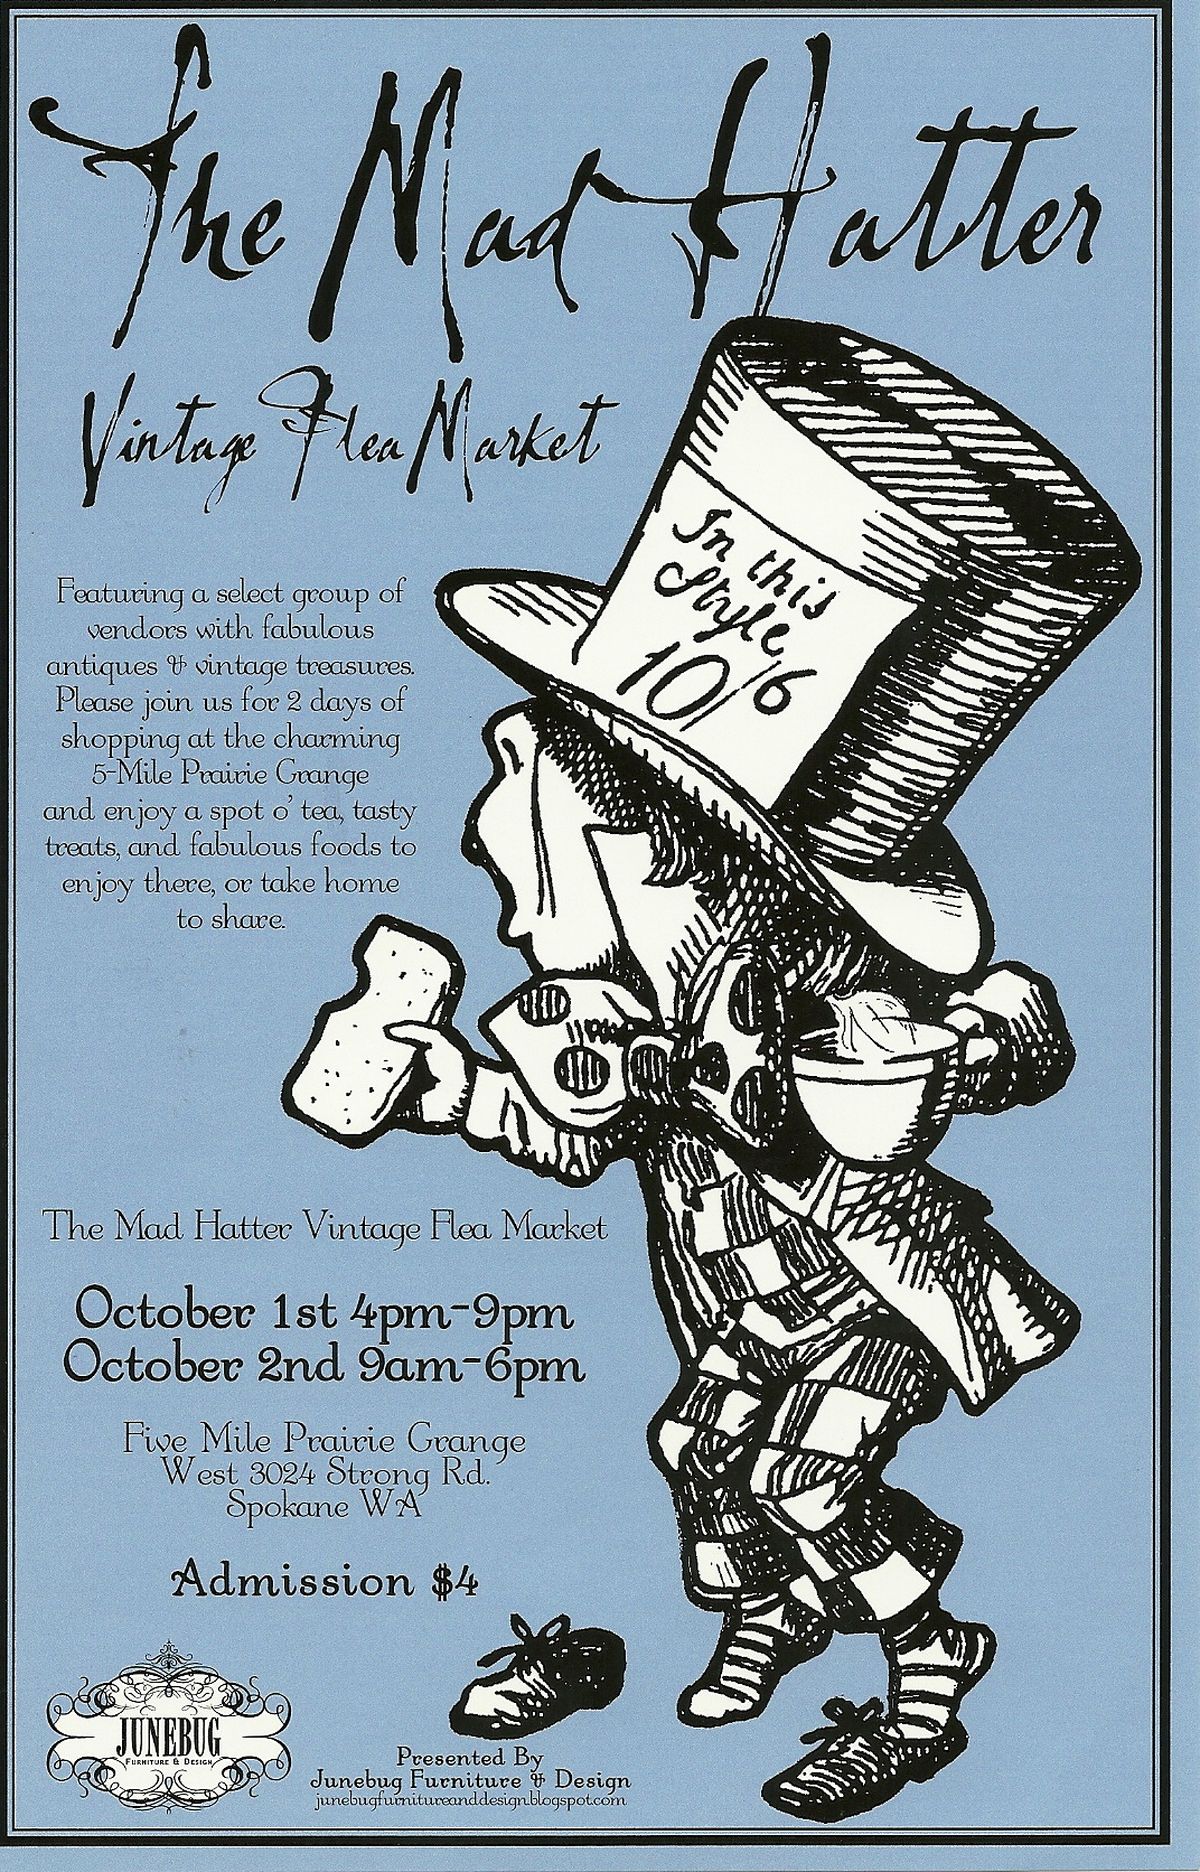 The Mad Hatter Vintage Flea Market will be held Oct. 1 and 2, 2010, at the Five Mile Prairie Grange. (Mad Hatter Vintage Flea Market)